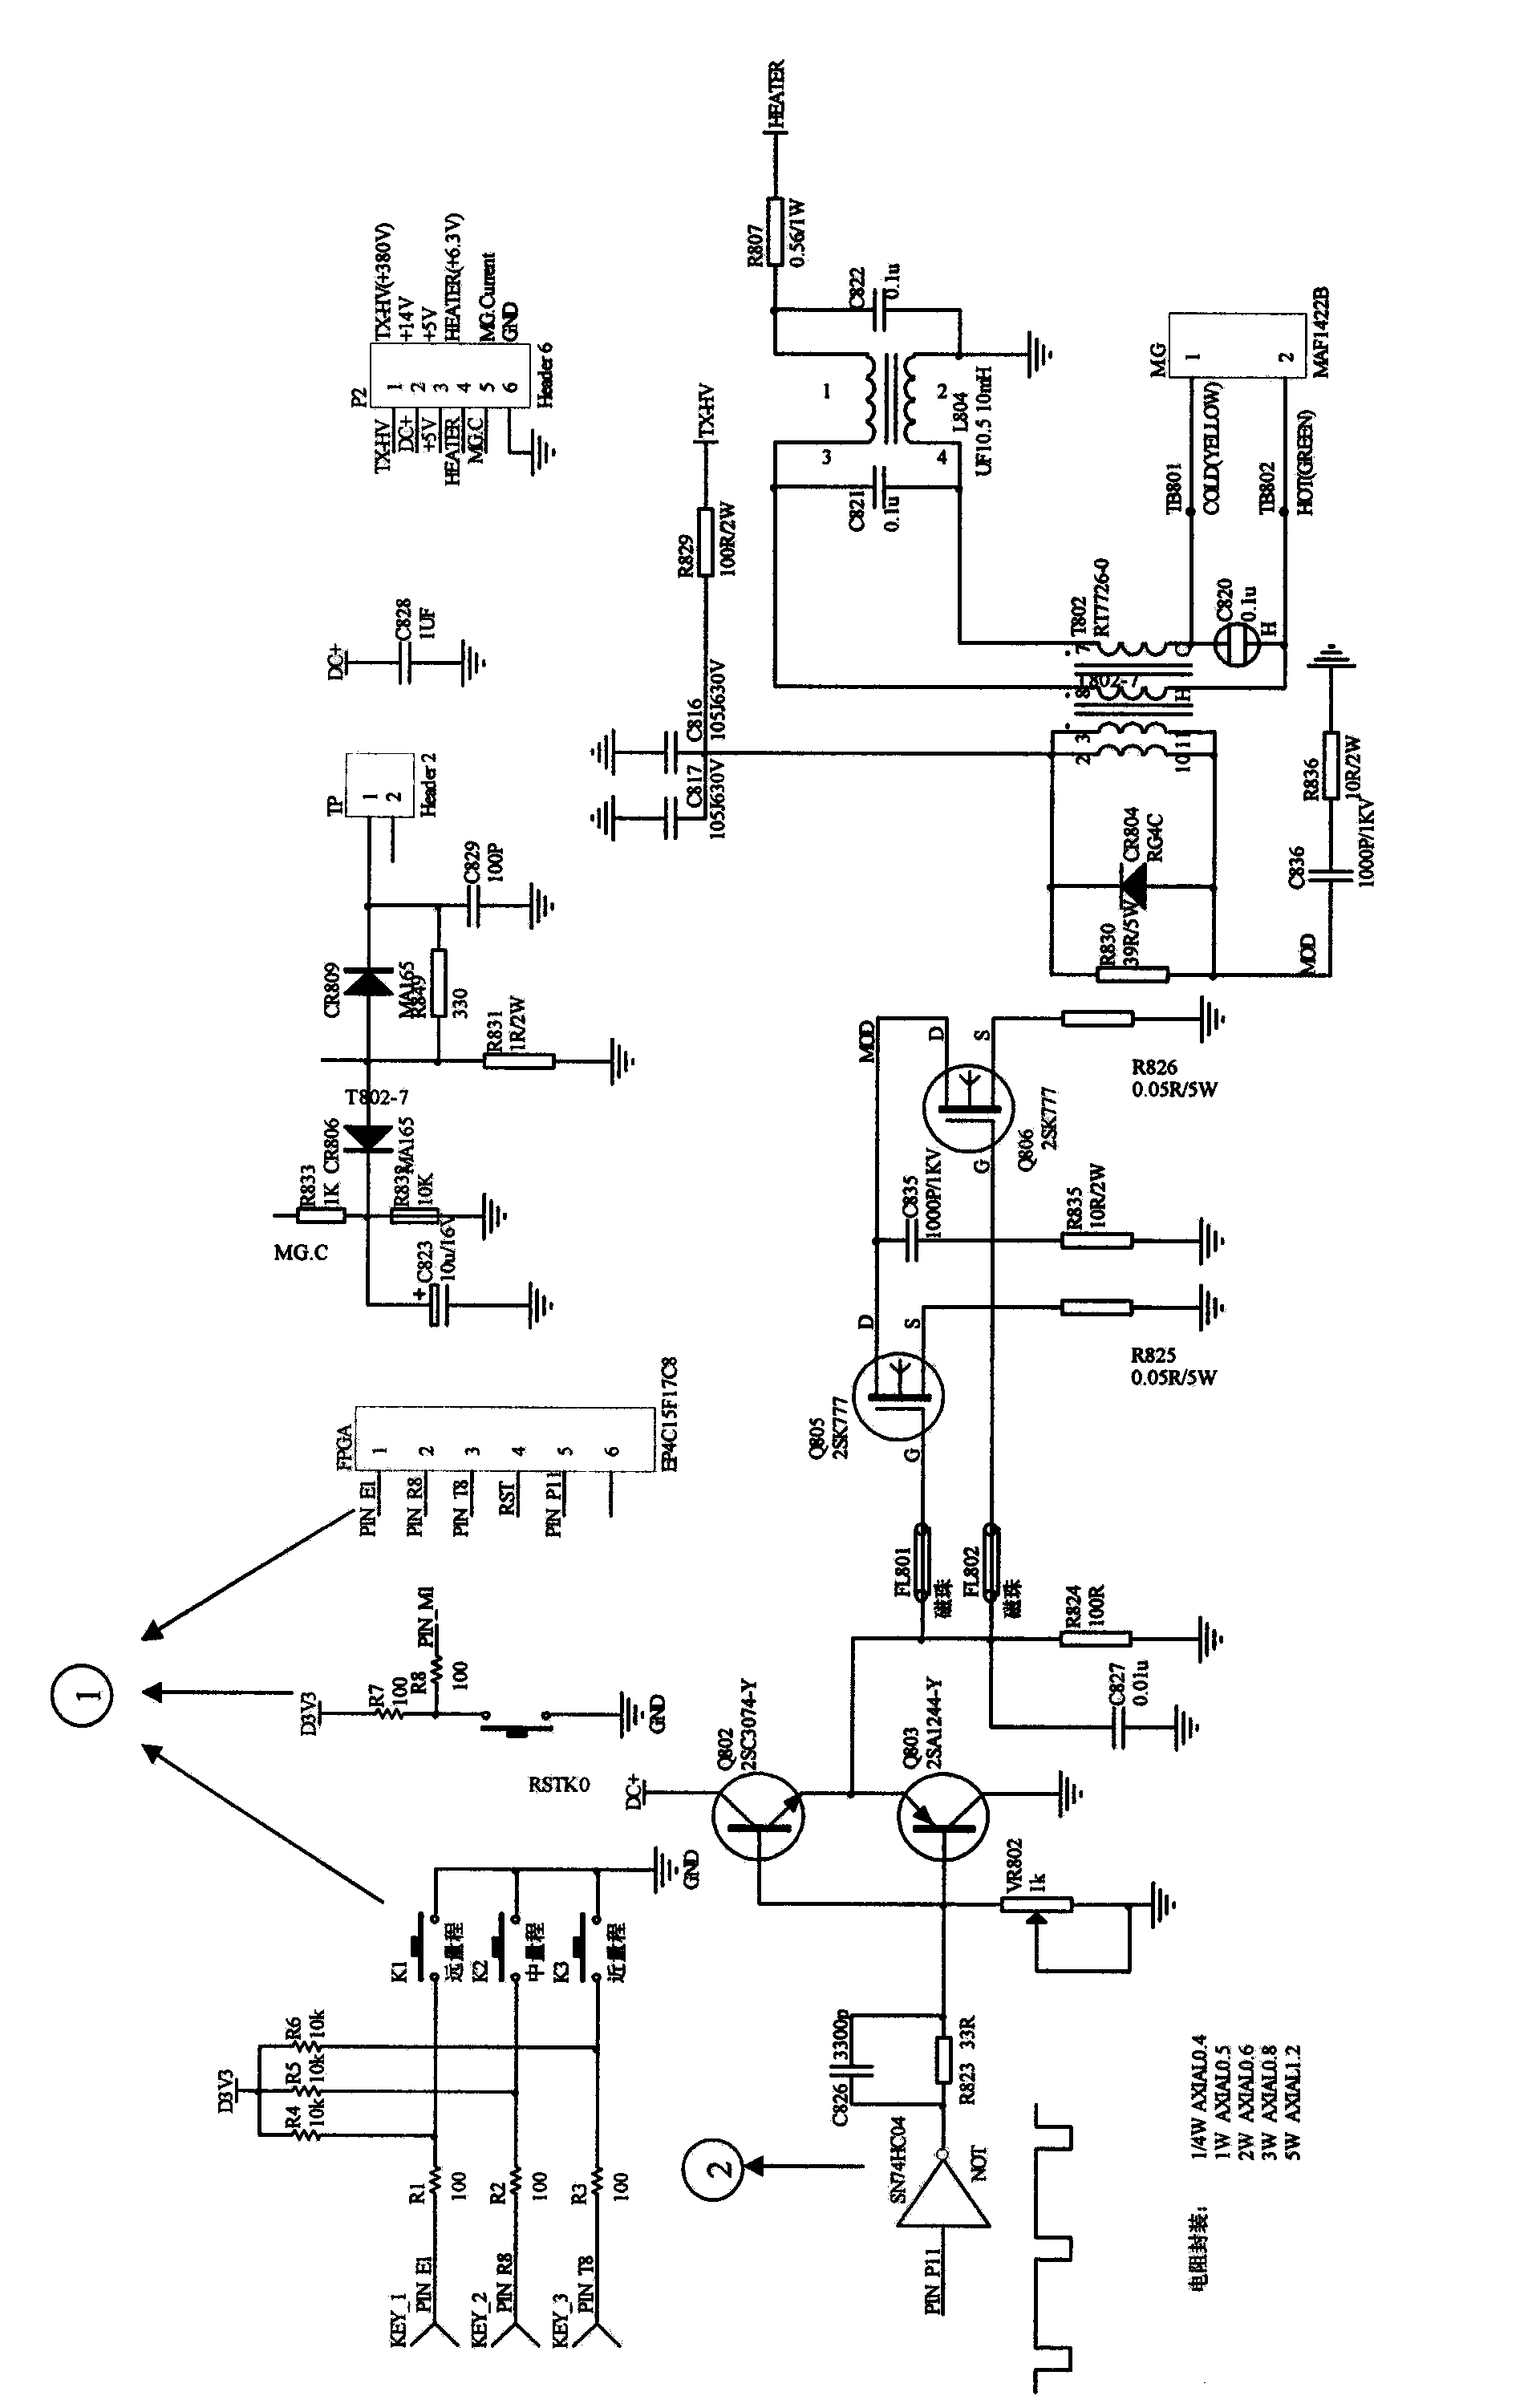 FPGA (field programmable gate array)-based method for implementing ship-navigation radar transmitting and receiving system